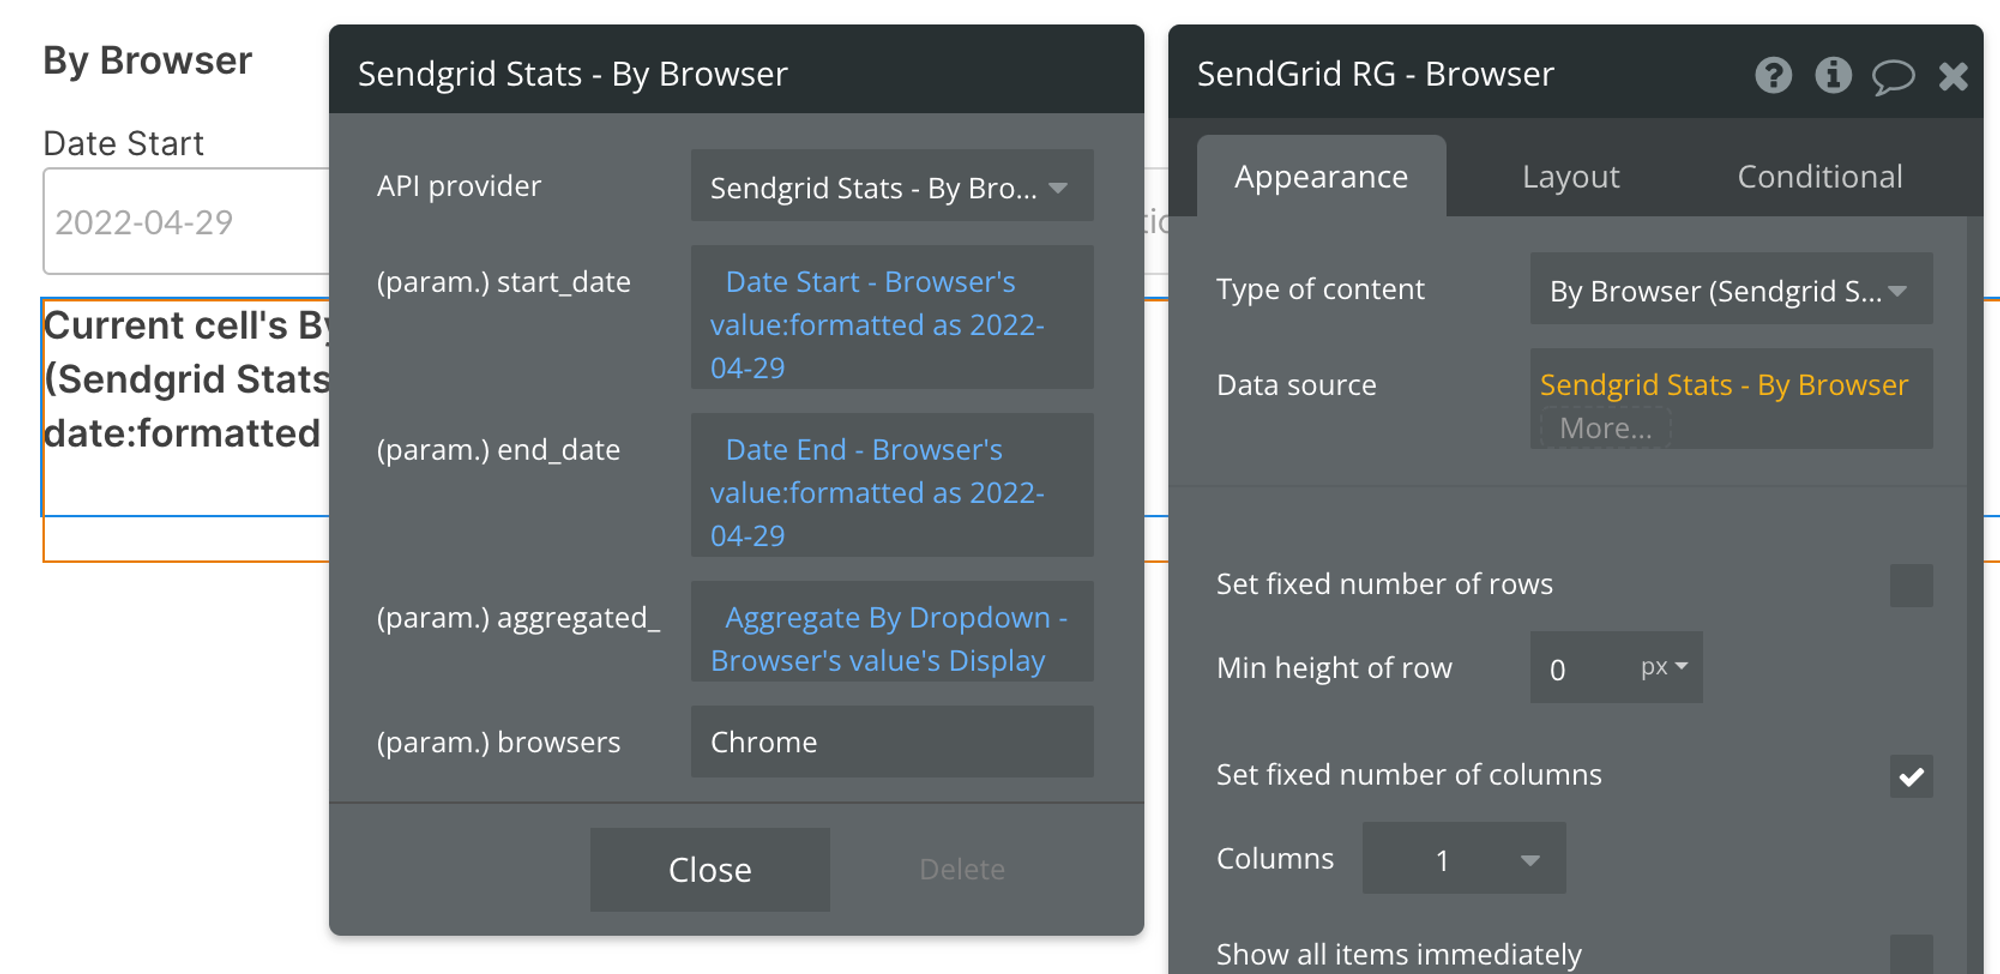 Select Sendgrid Stats - By Browser from the API provider dropdown